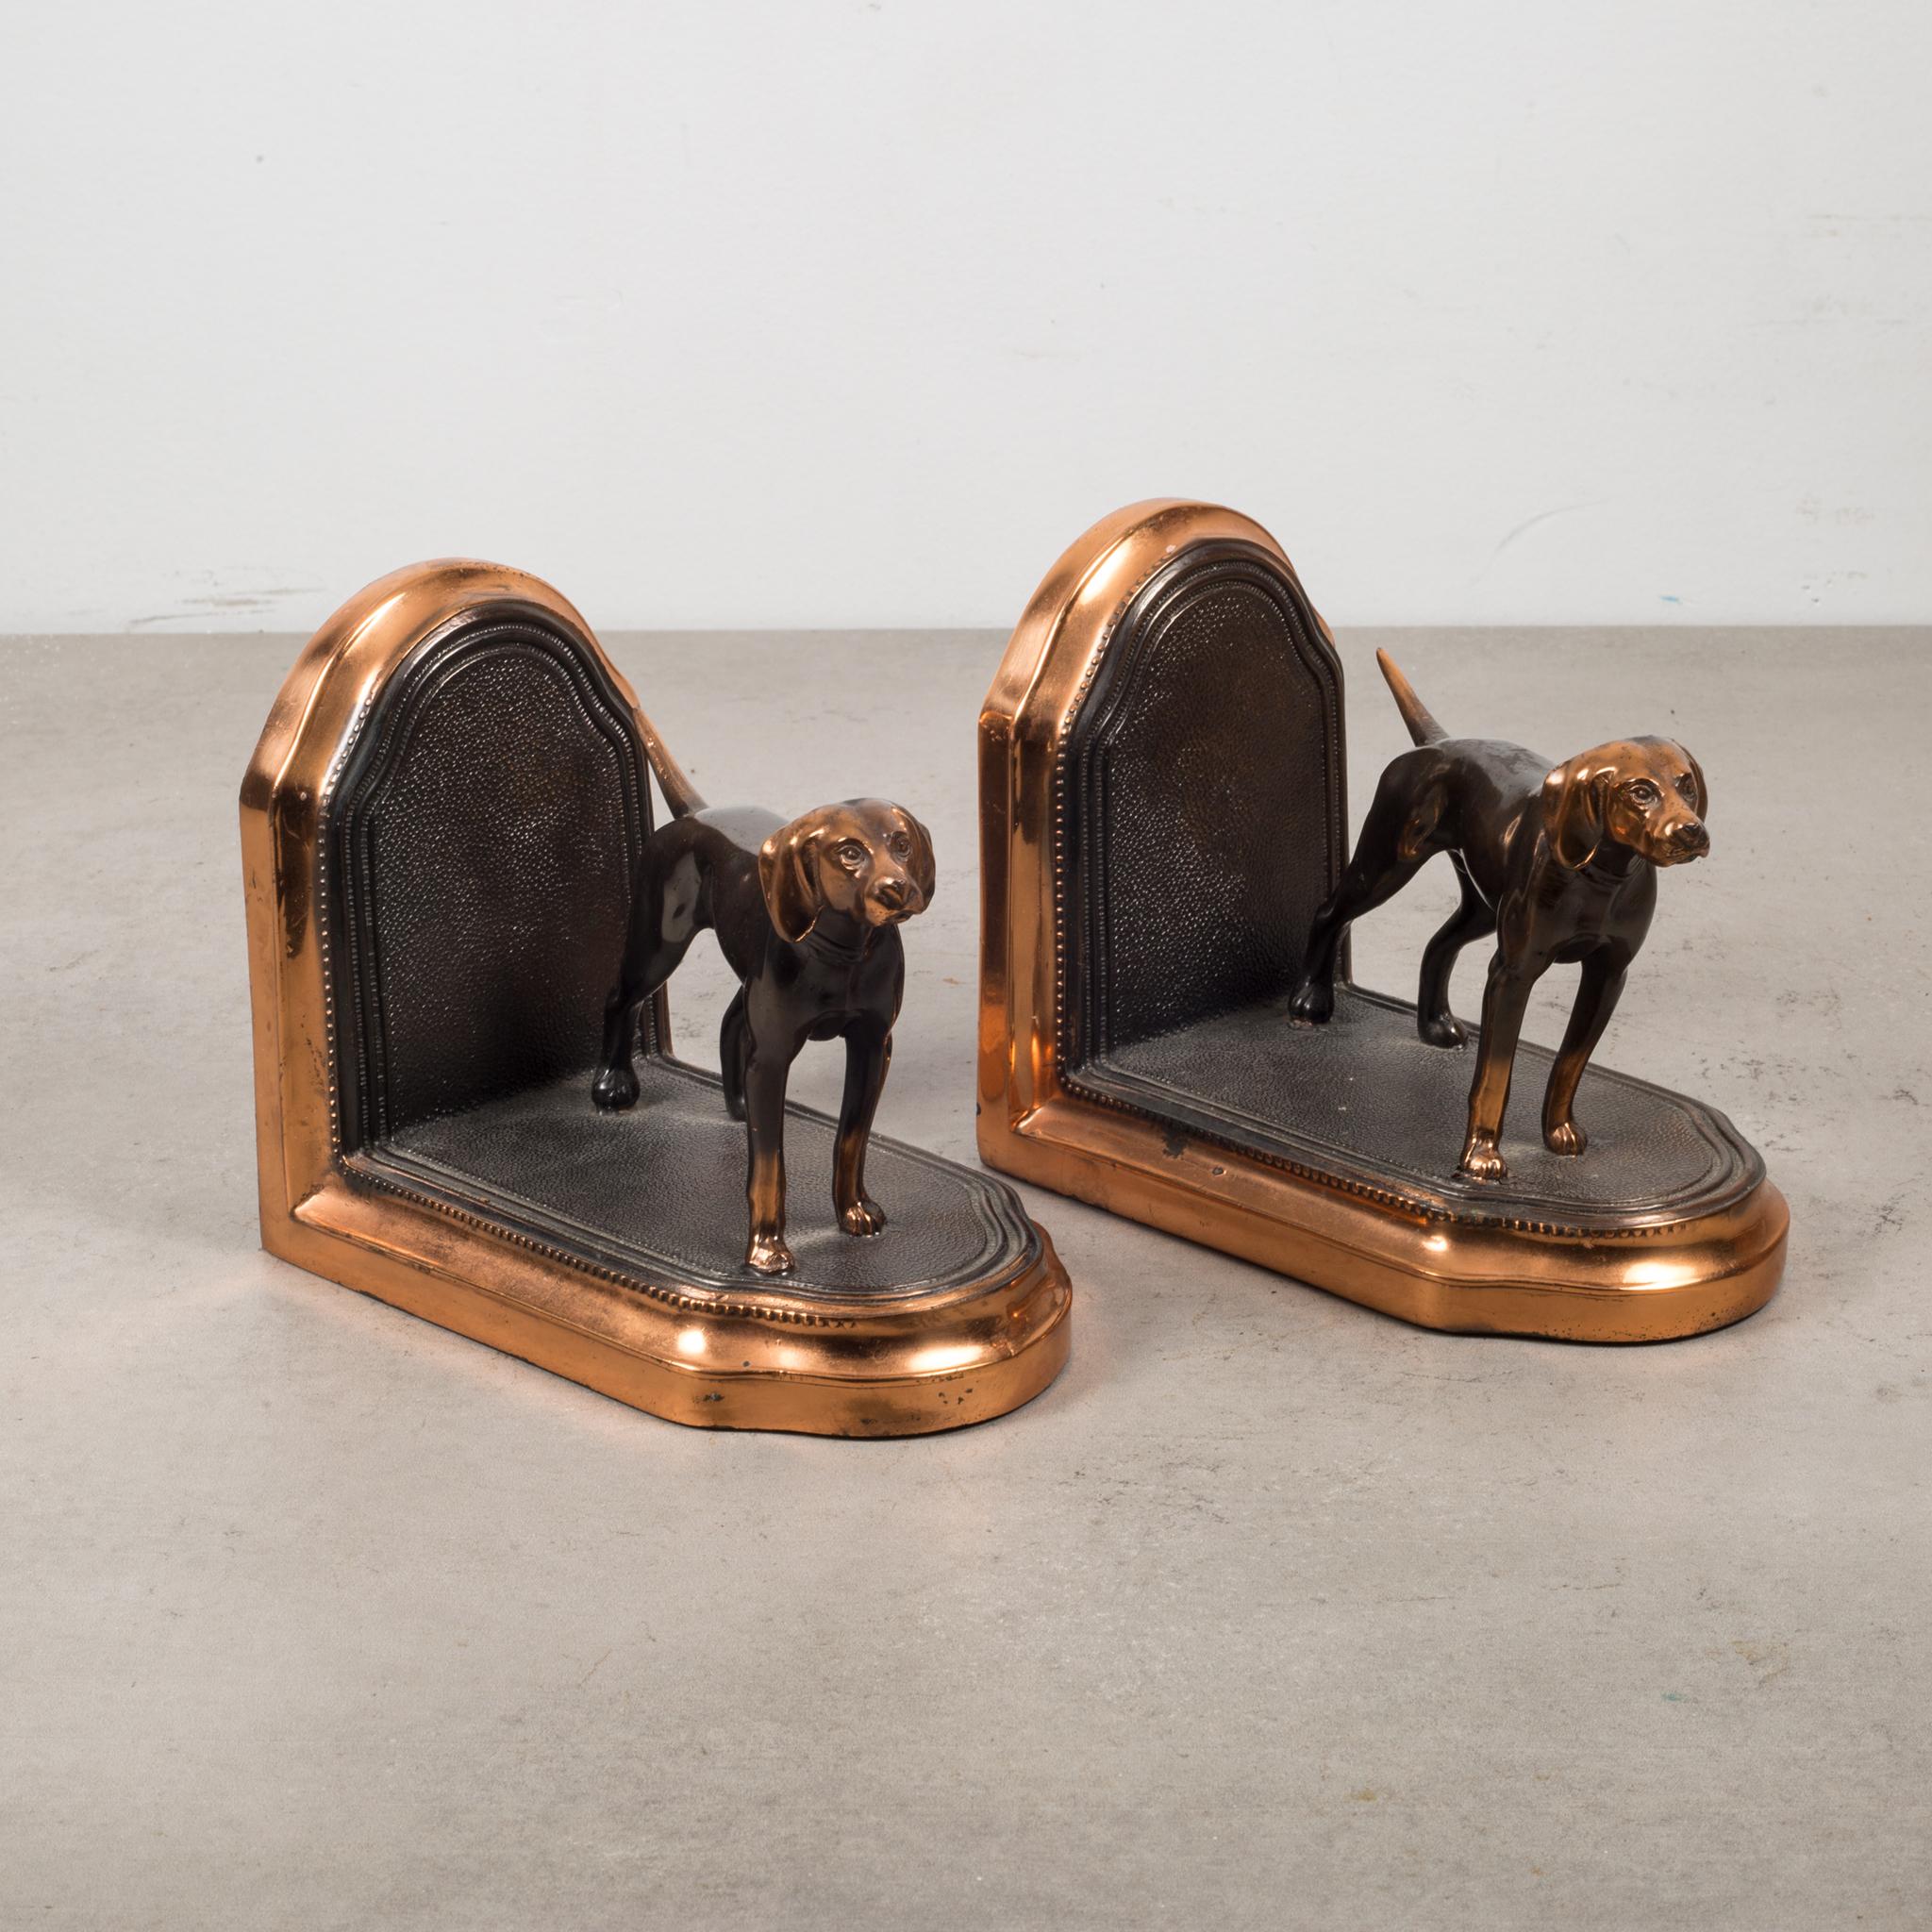 About

This is a pair of original copper-plated bookends of pointer dogs with faux leather pattern. Both bookends are in good condition and have retained their copper finish and have the appropriate patina consistent with age and use. The felt on